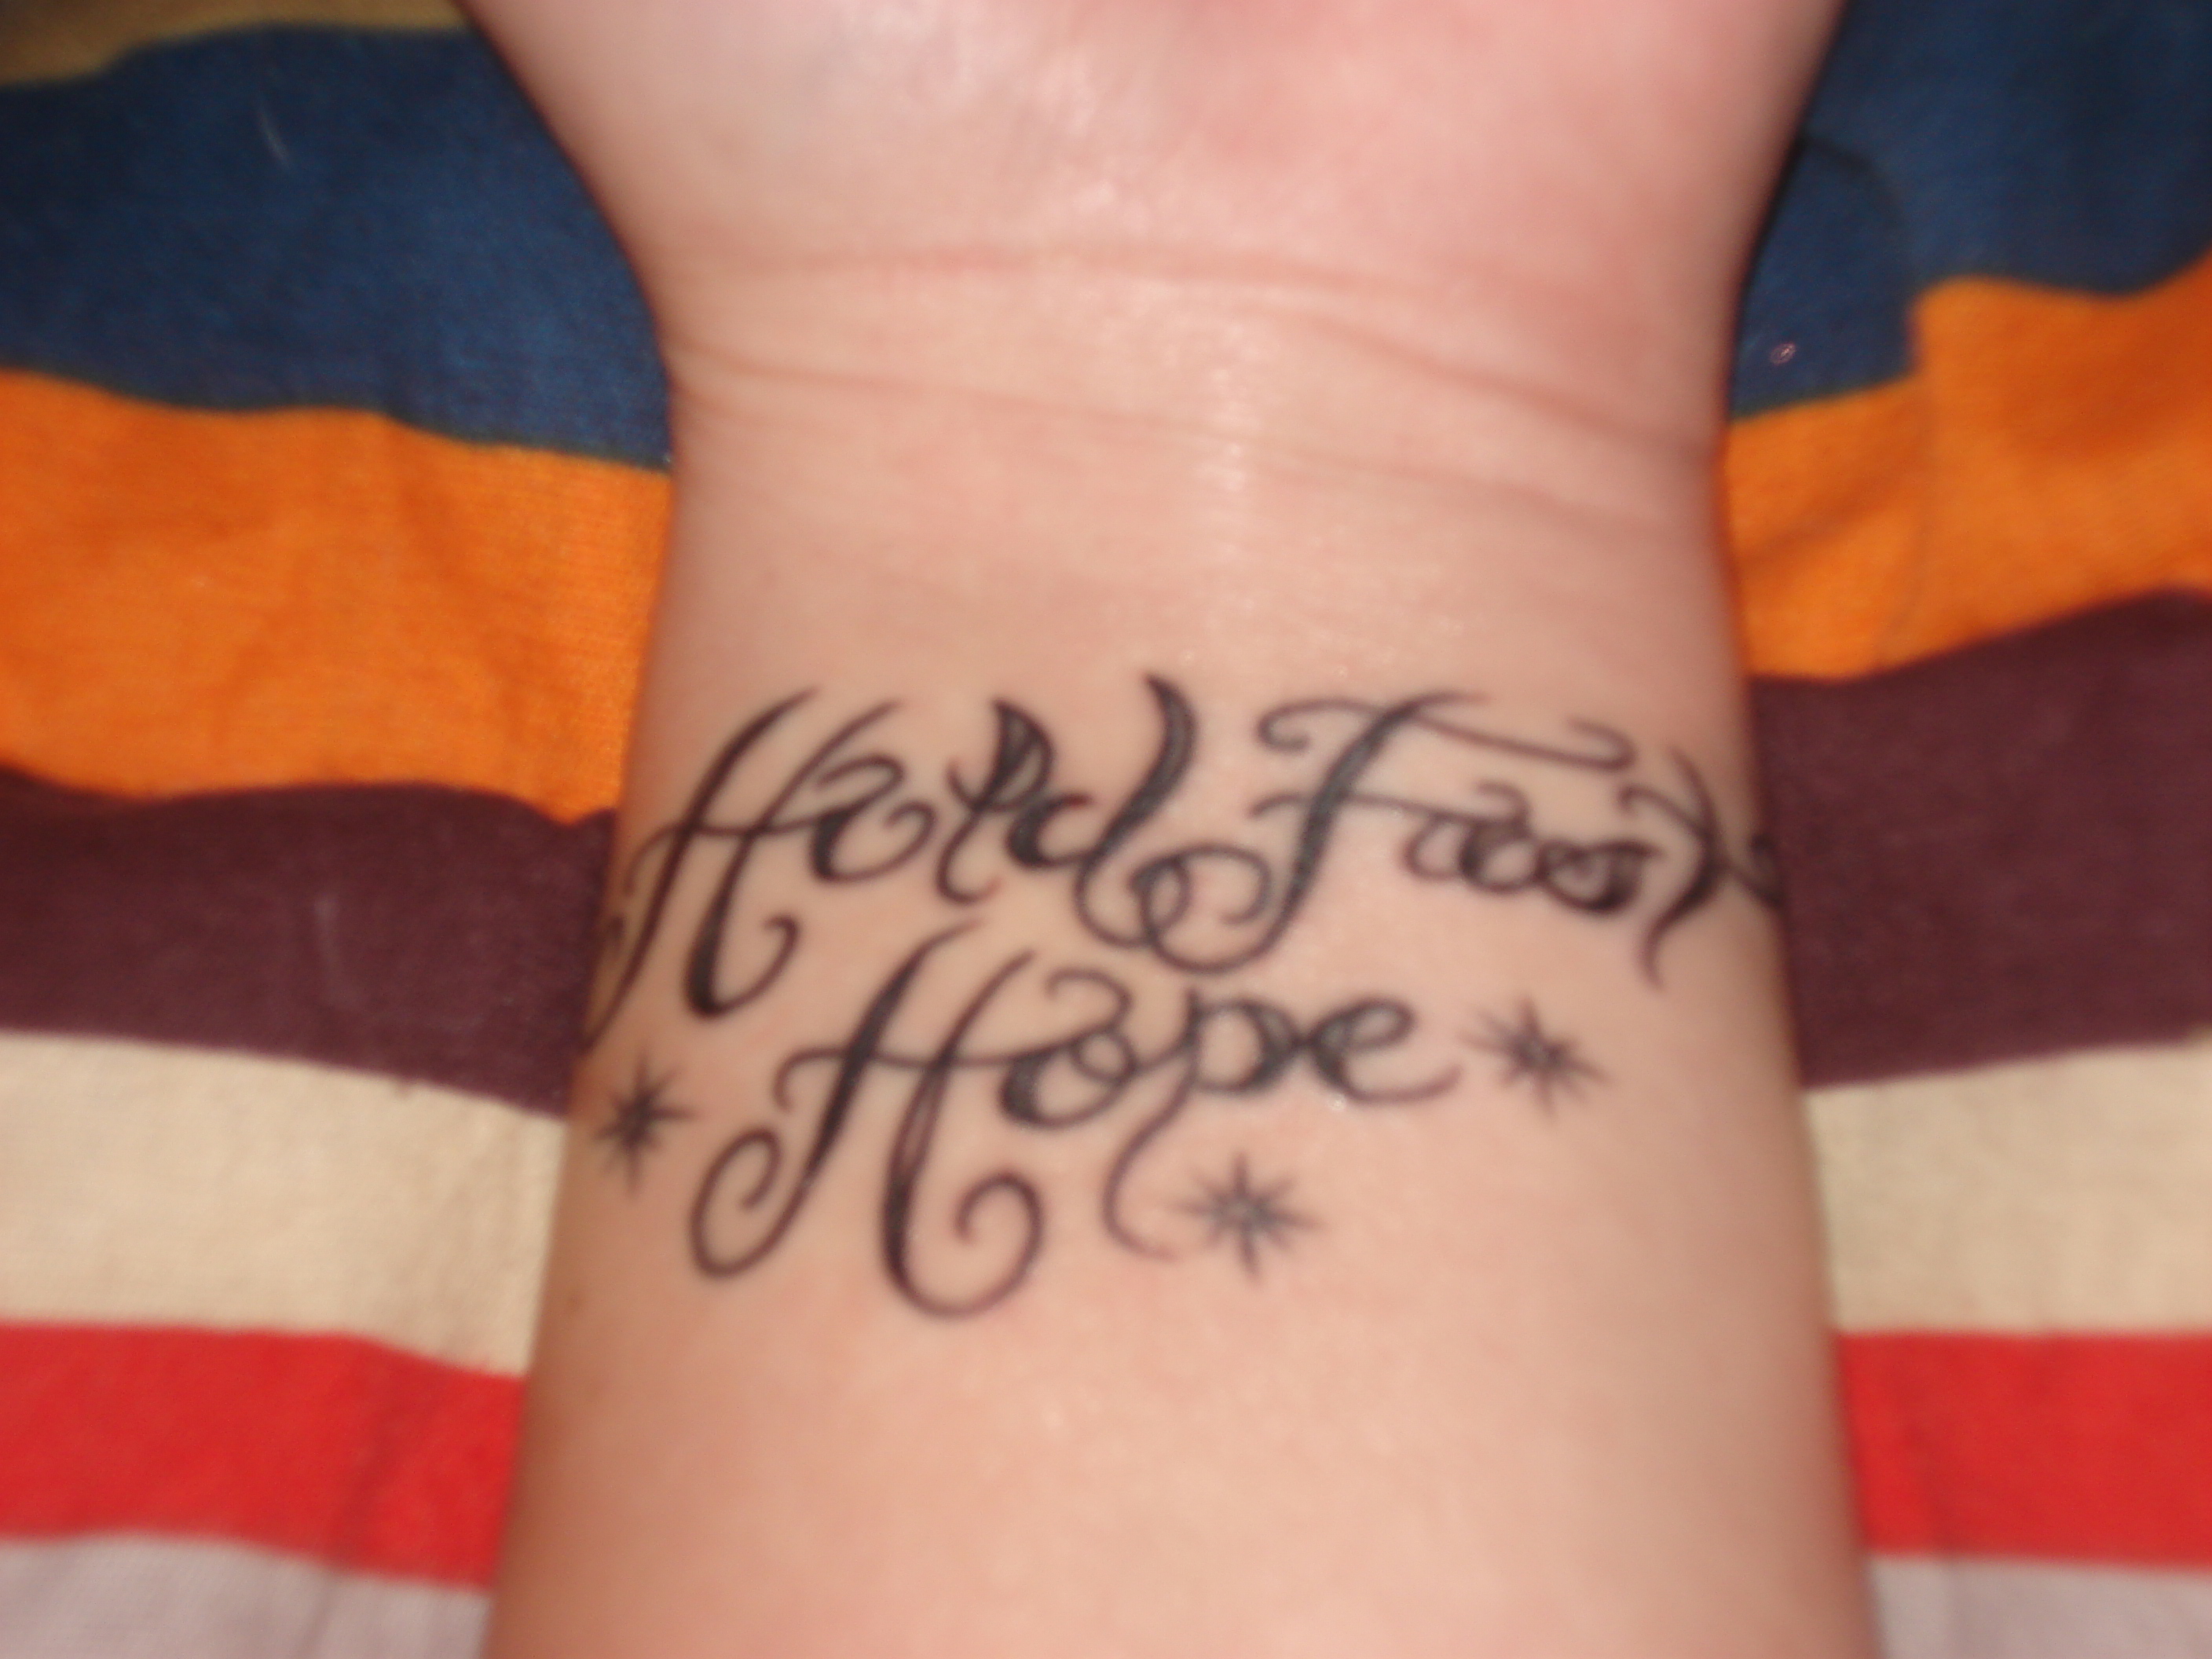 Hold Fast Hope Tattoo by BlueOct4lf on DeviantArt